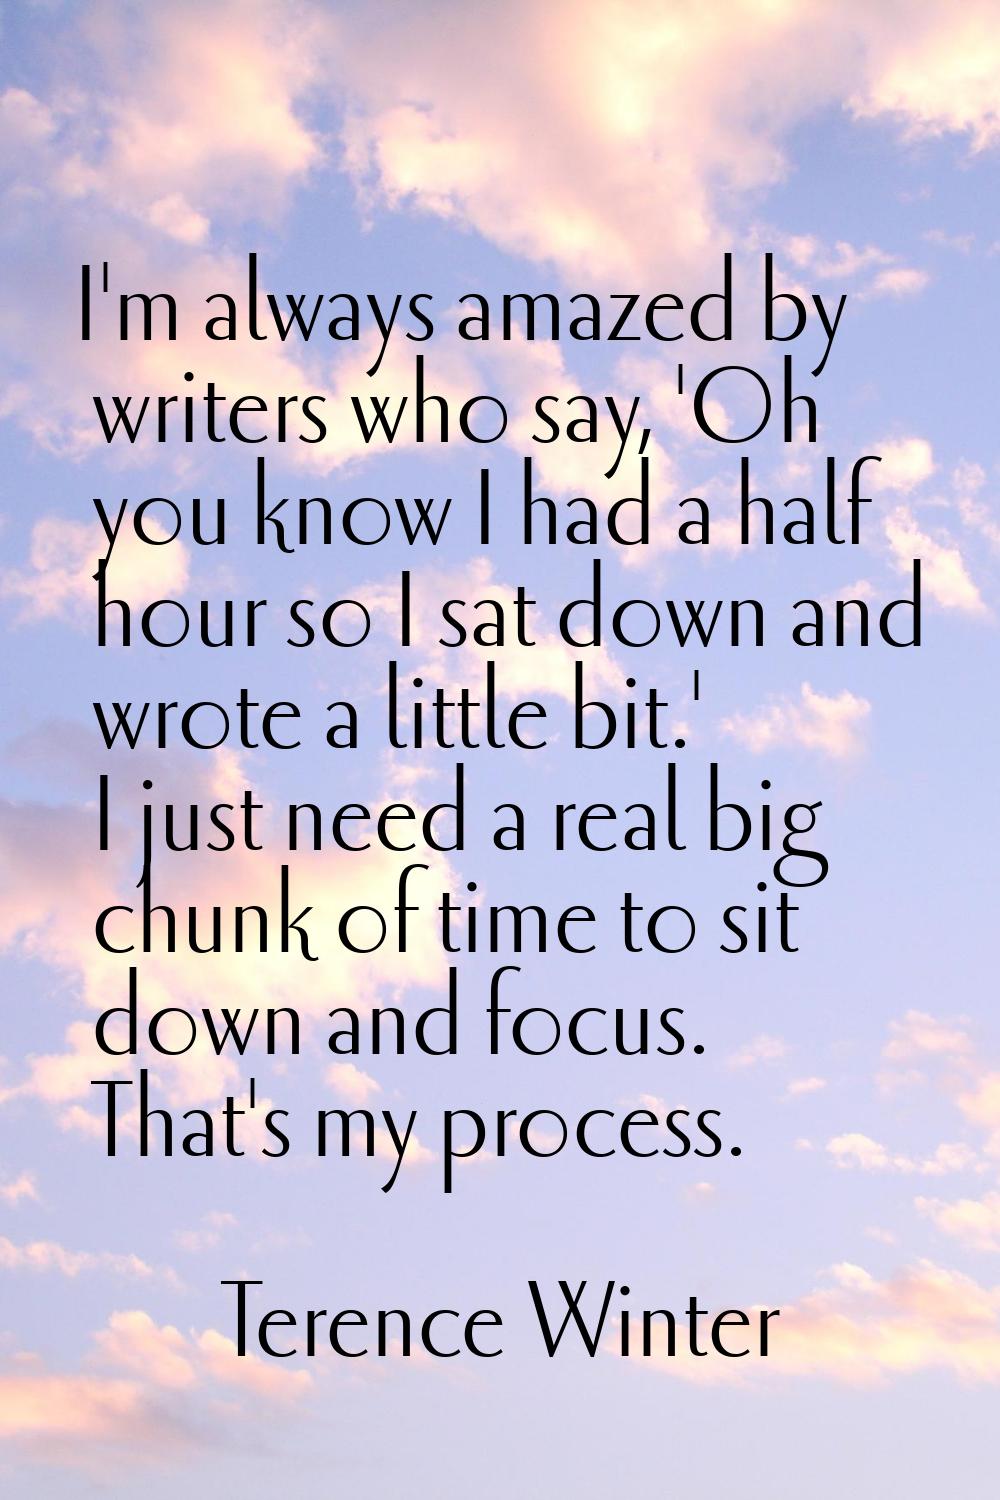 I'm always amazed by writers who say, 'Oh you know I had a half hour so I sat down and wrote a litt